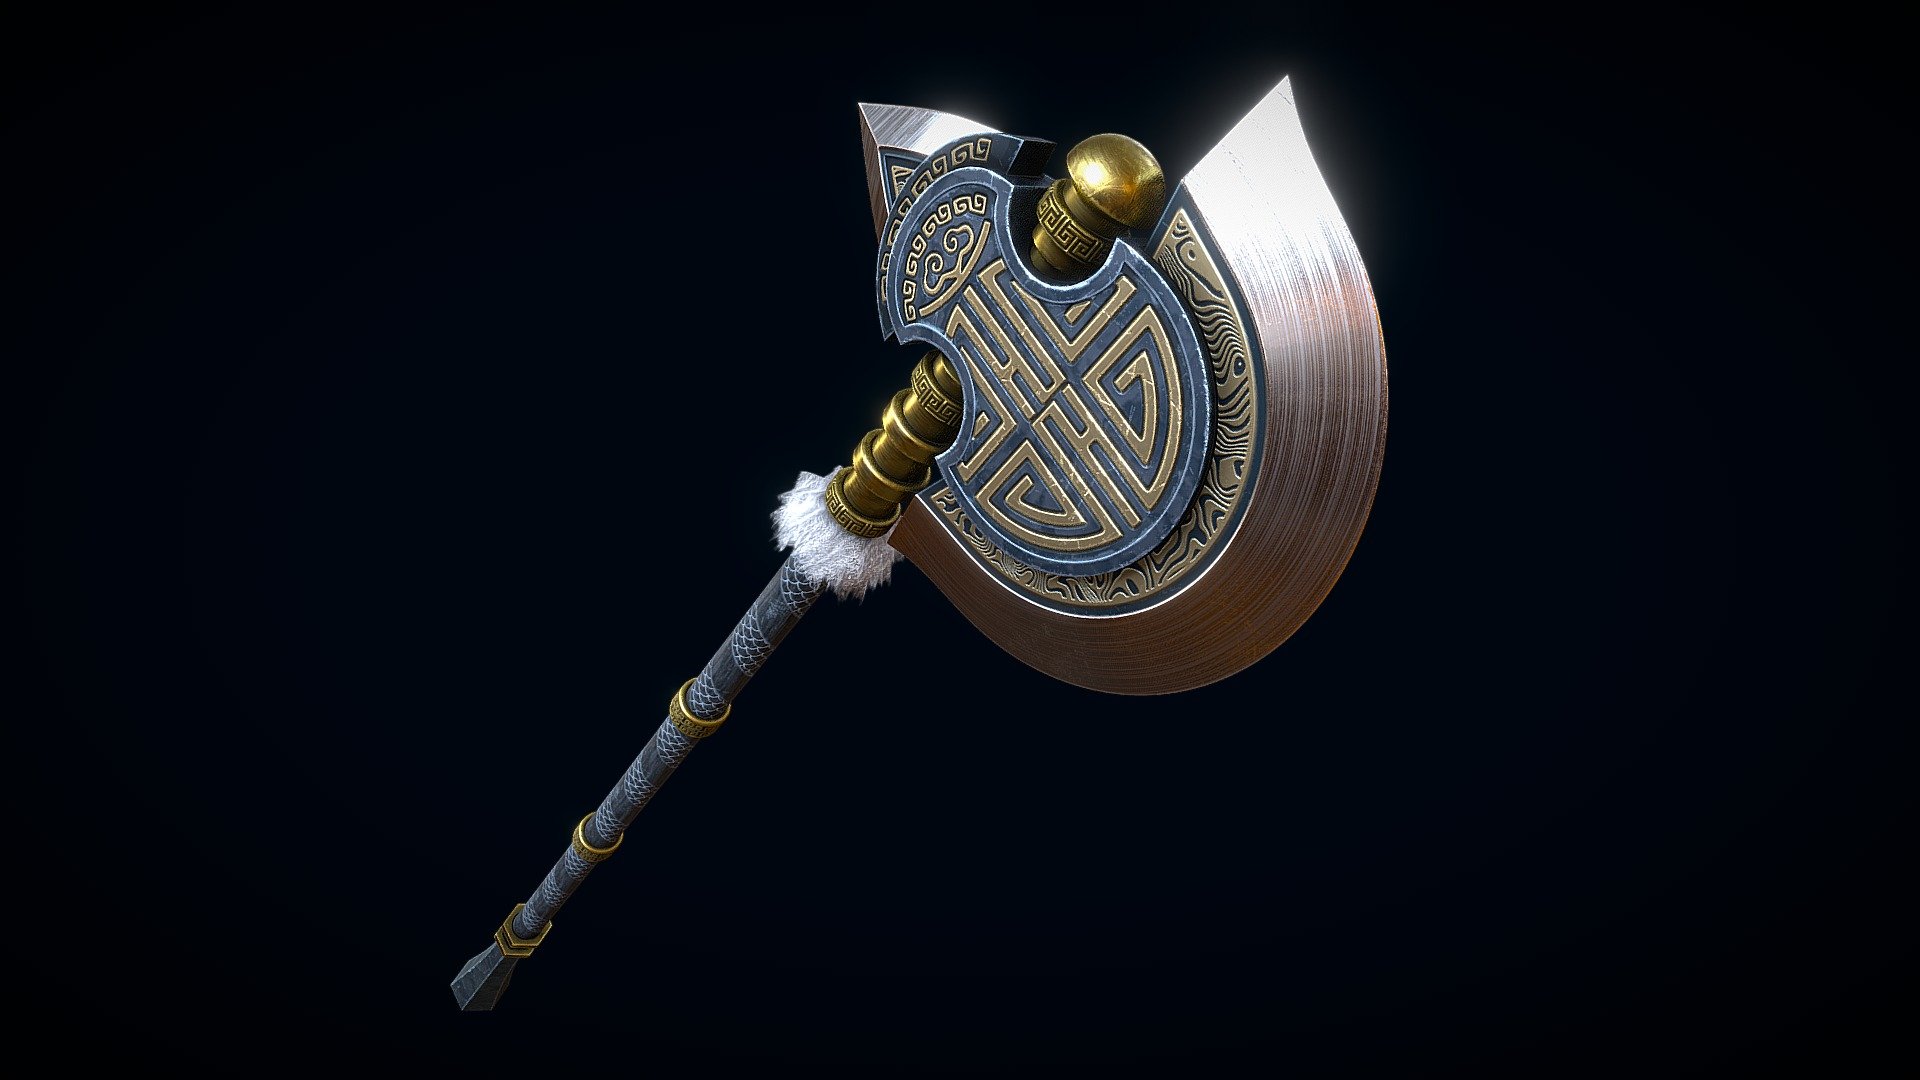 Low-poly 3D model of the Chinese Great Axe, the model separated into two textures 2K sets for axe and tassel 3d model